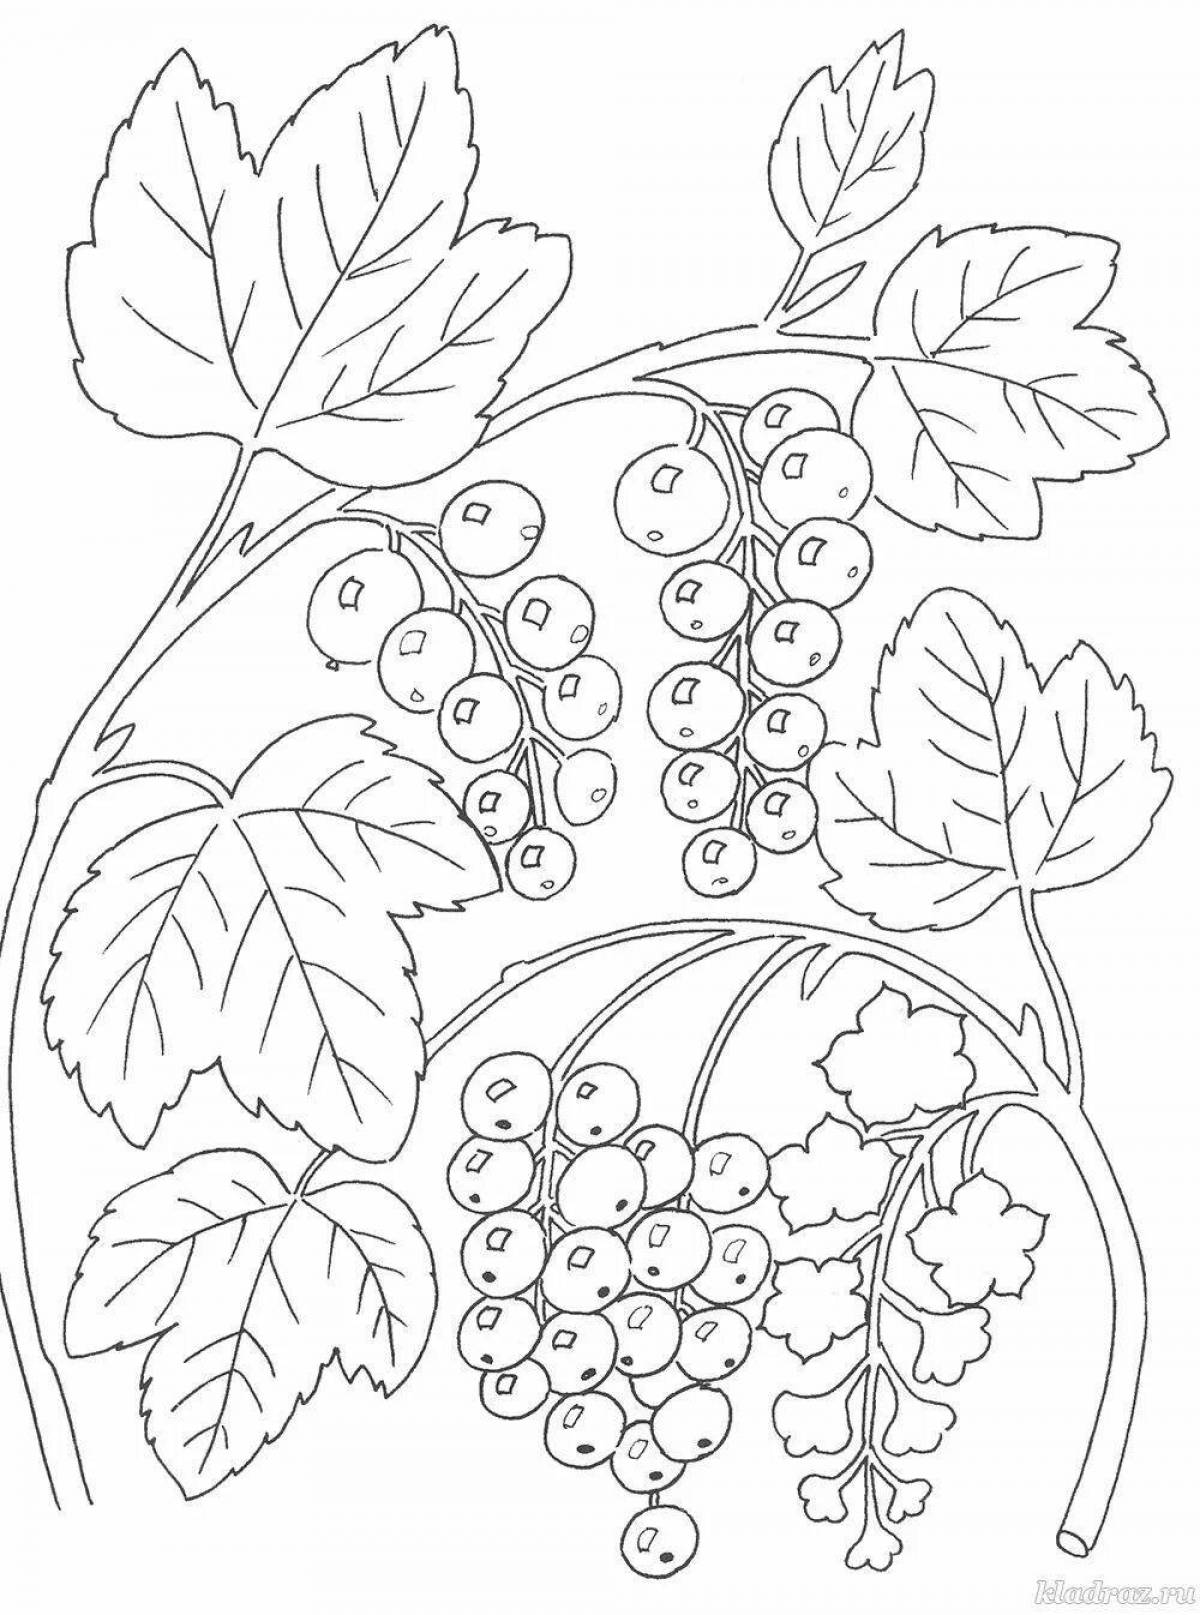 Fun currant coloring book for kids